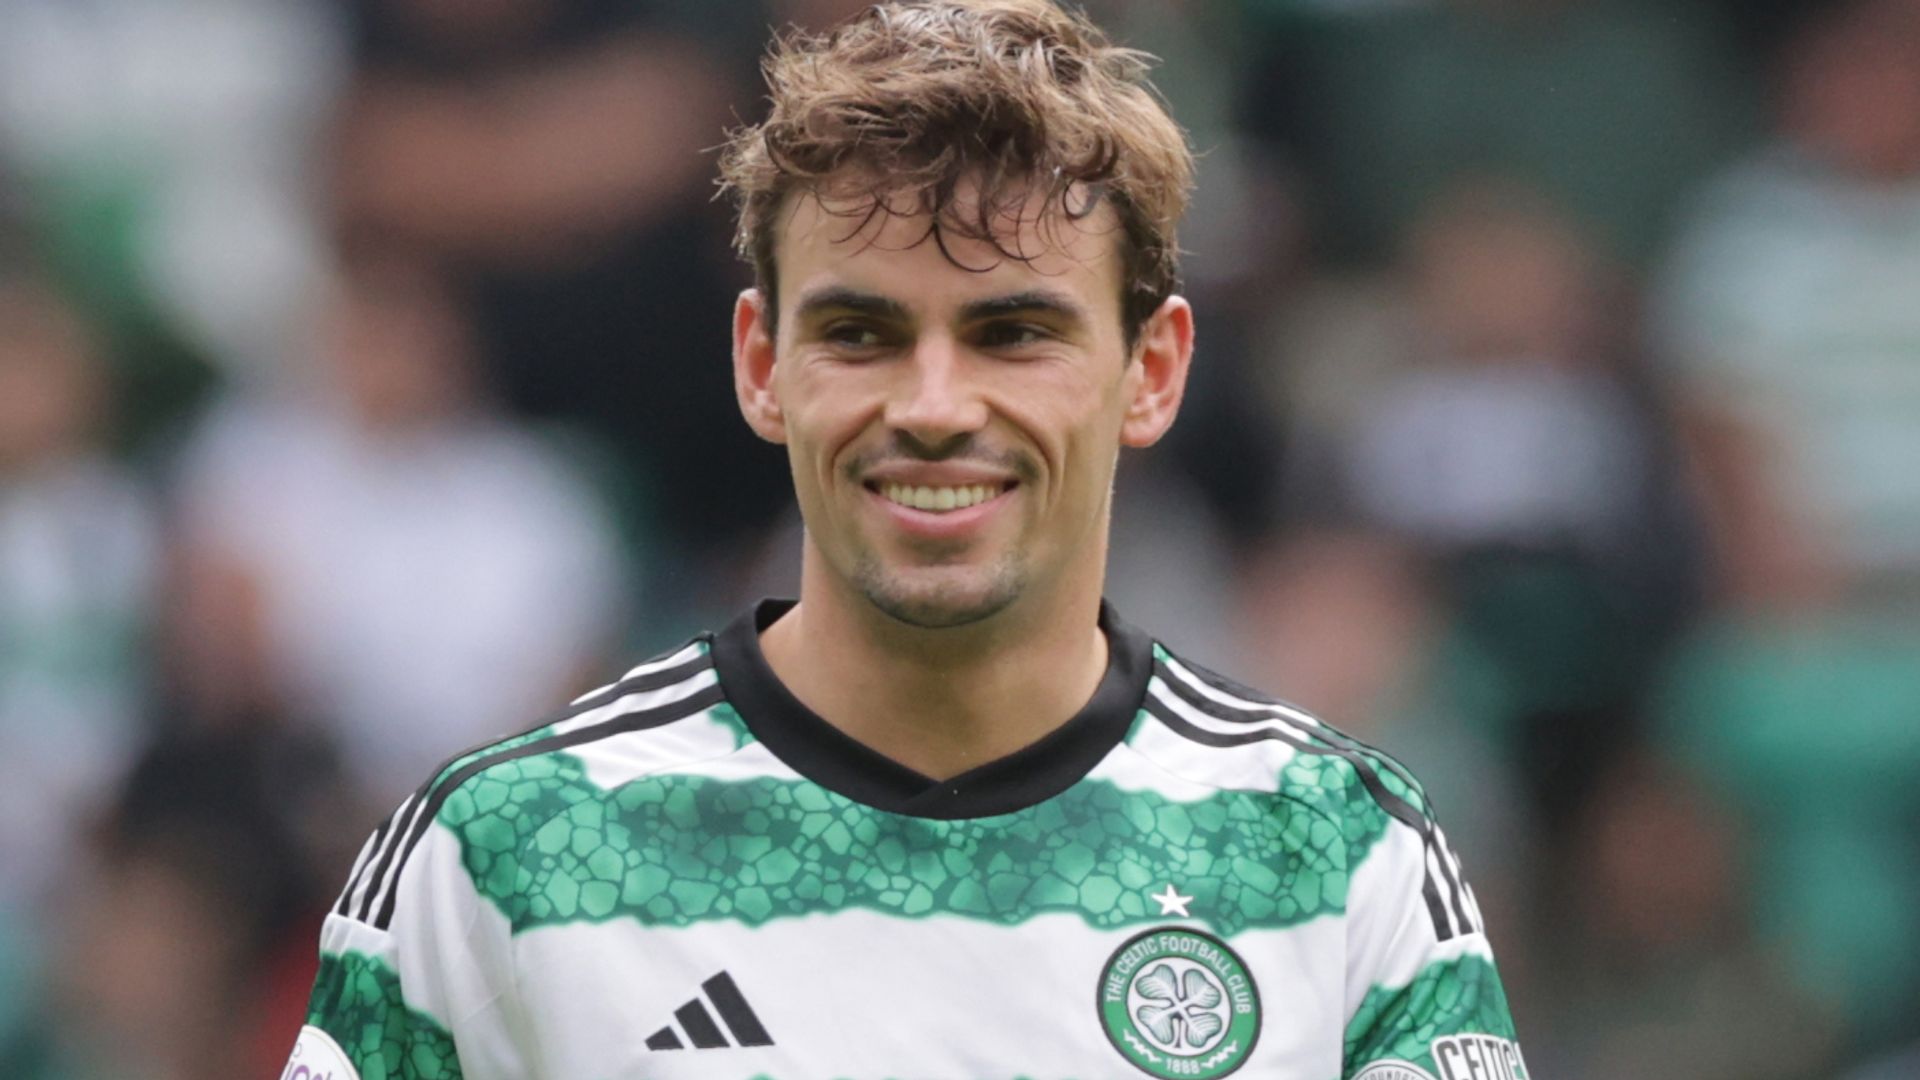 Celtic's O'Riley being considered for first senior Denmark call-up 